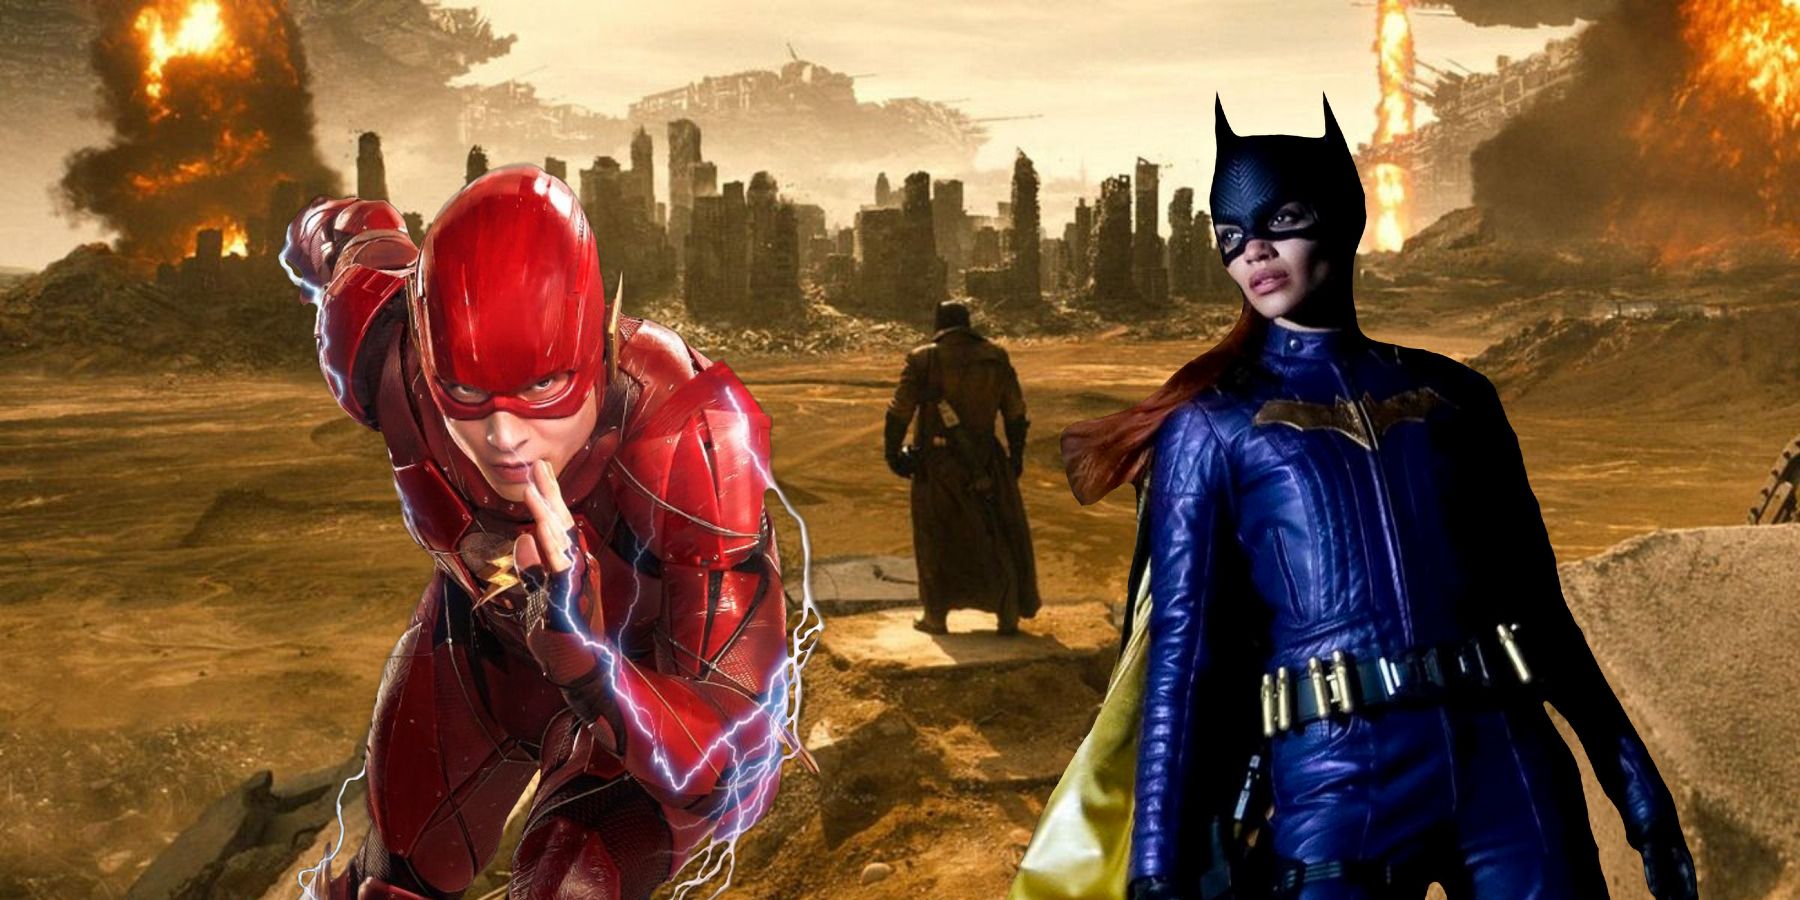 The Flash and Batgirl with Batman Knightmare background